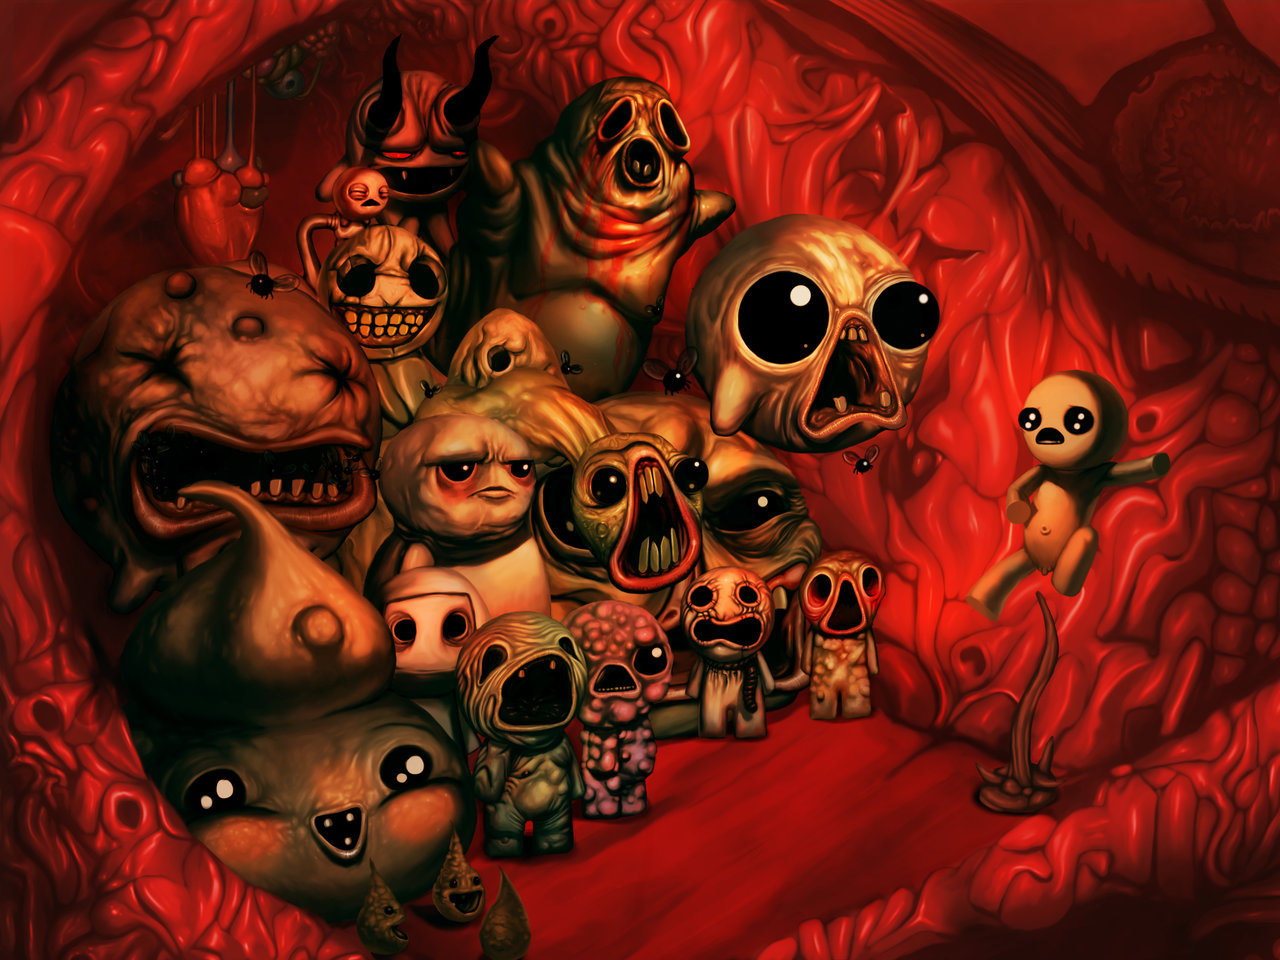 Steam Community :: The Binding of Isaac